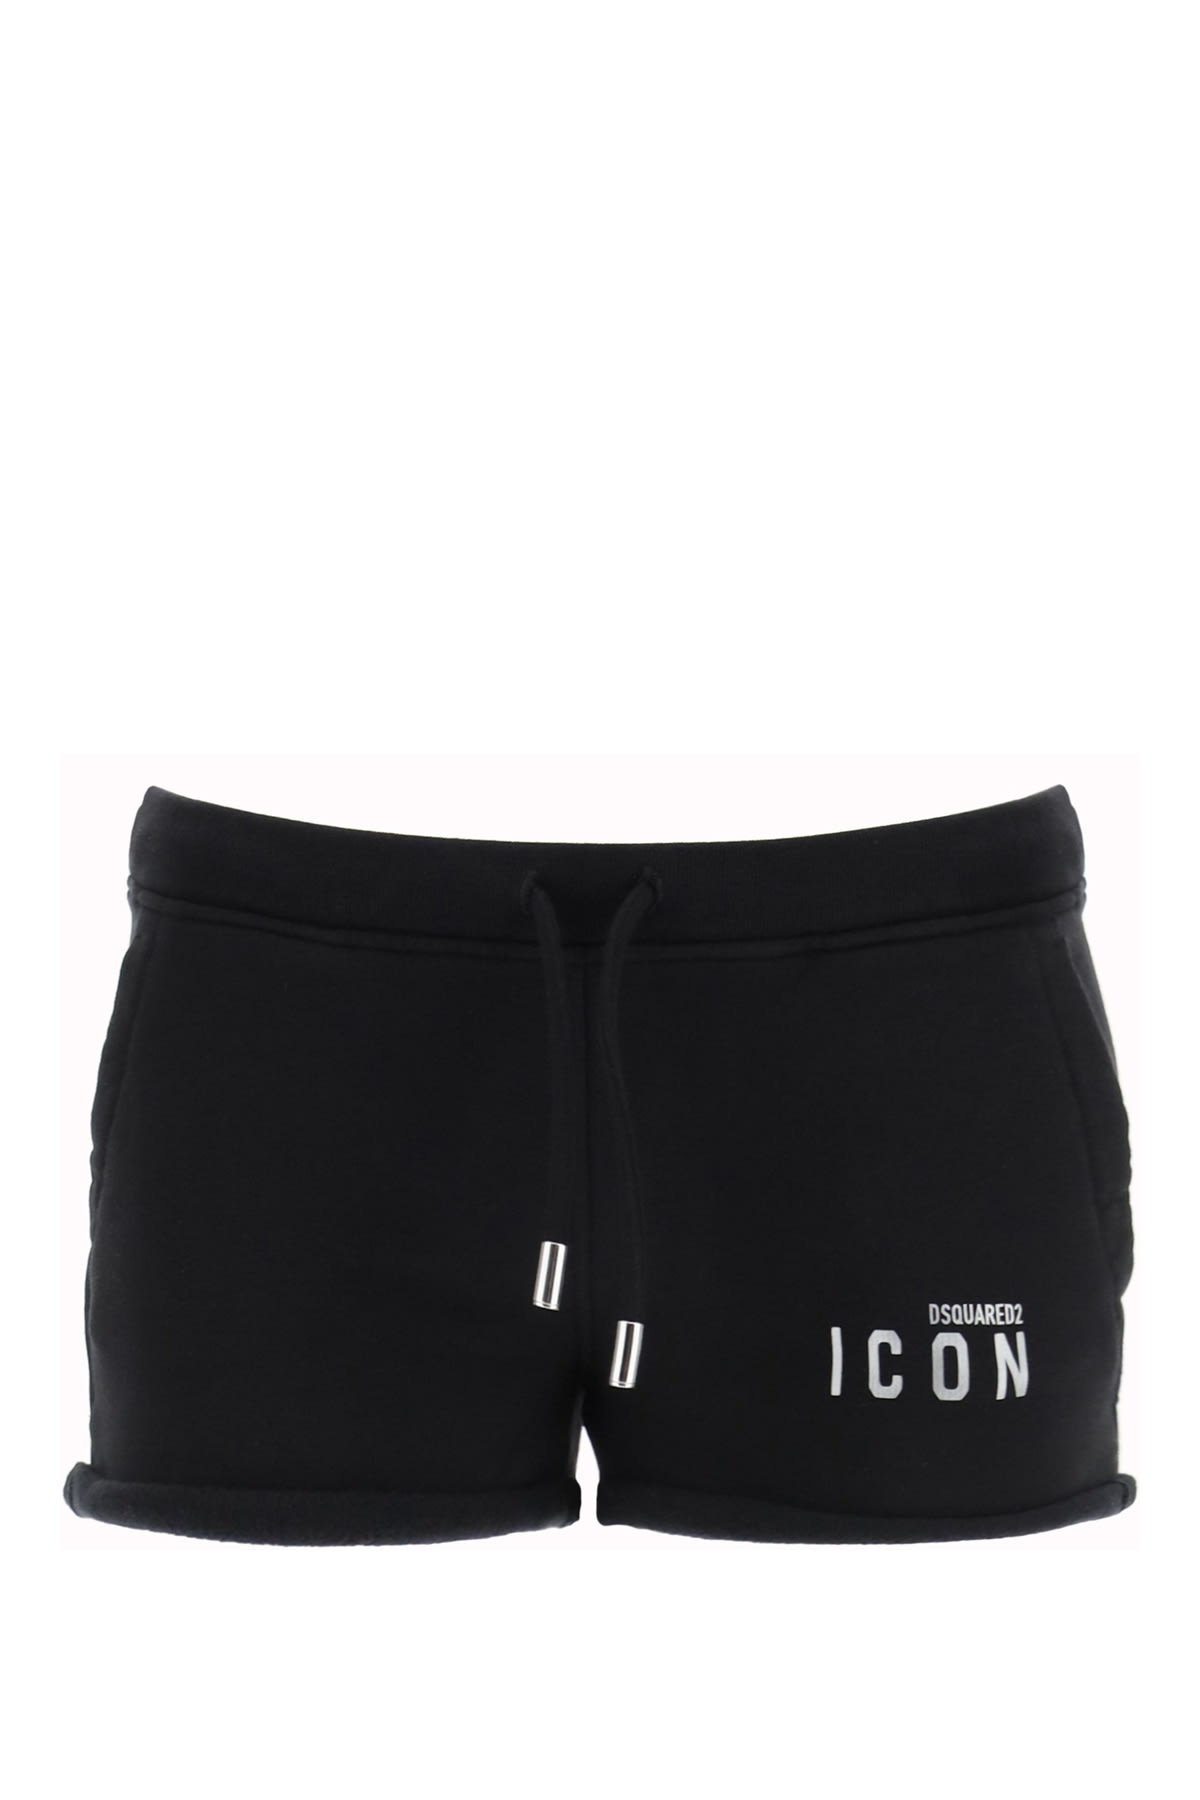 Dsquared2 Jersey Shorts With Reflective Icon Print